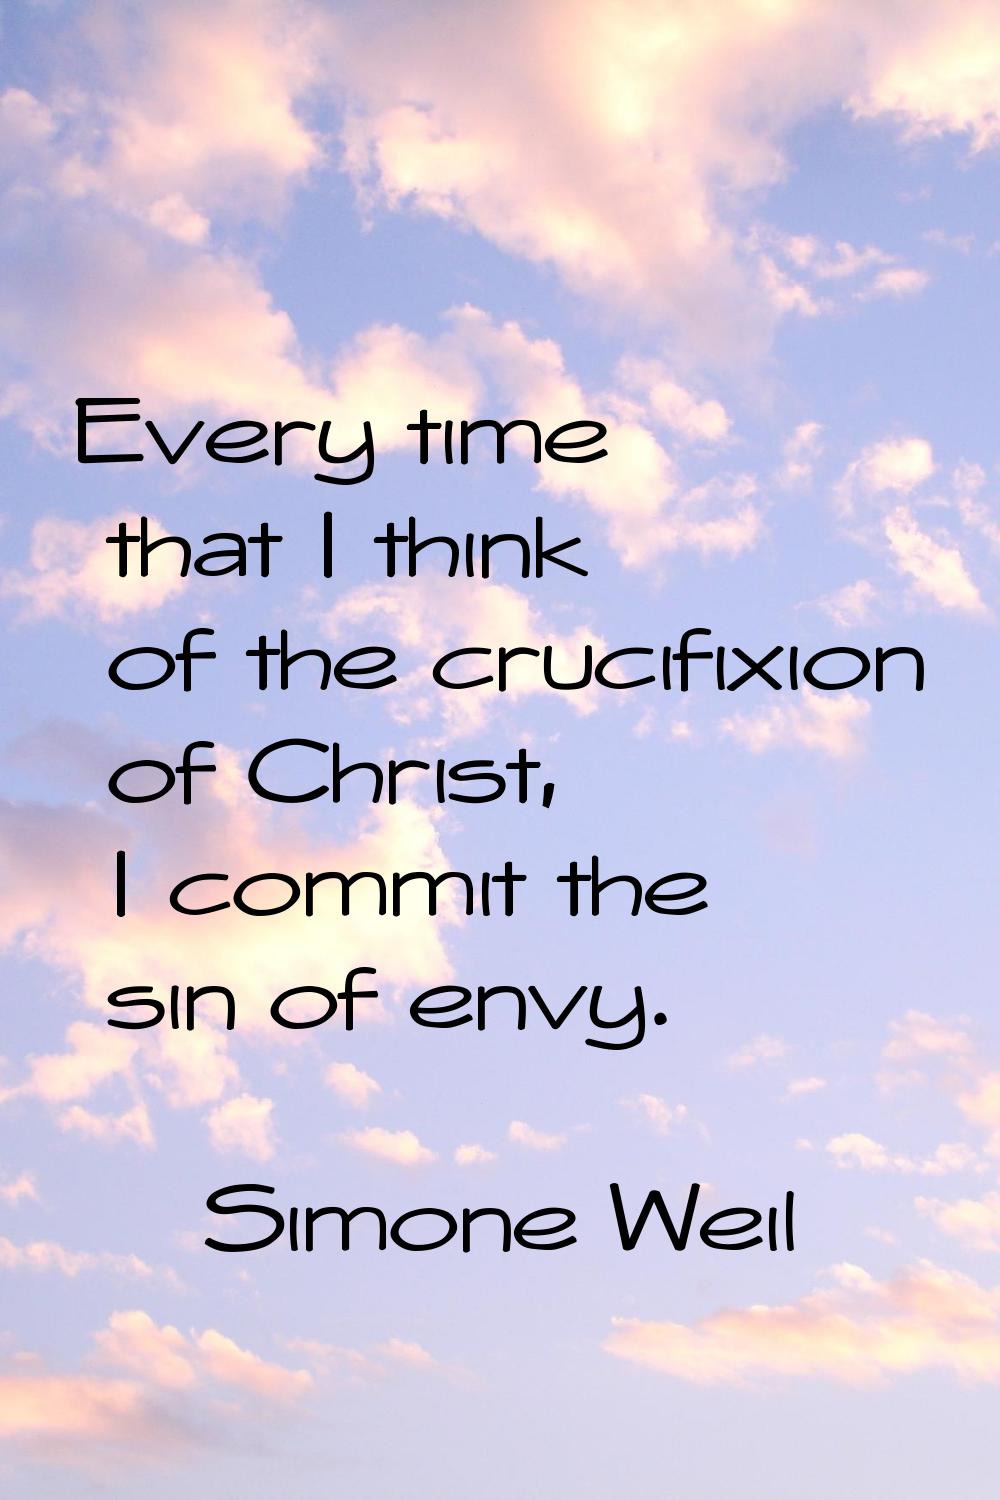 Every time that I think of the crucifixion of Christ, I commit the sin of envy.